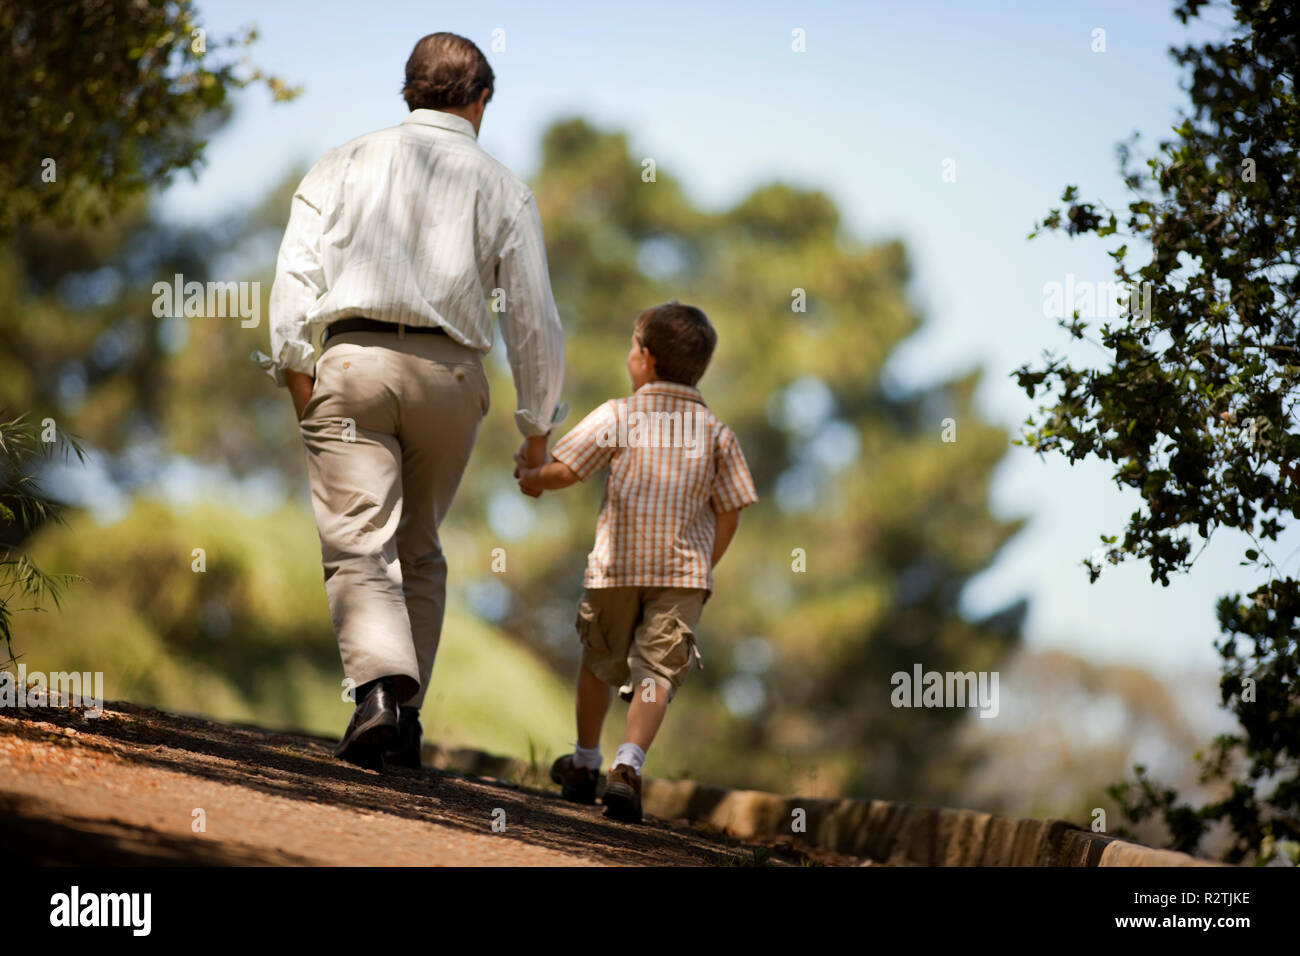 Father and son walk hand in hand. Stock Photo